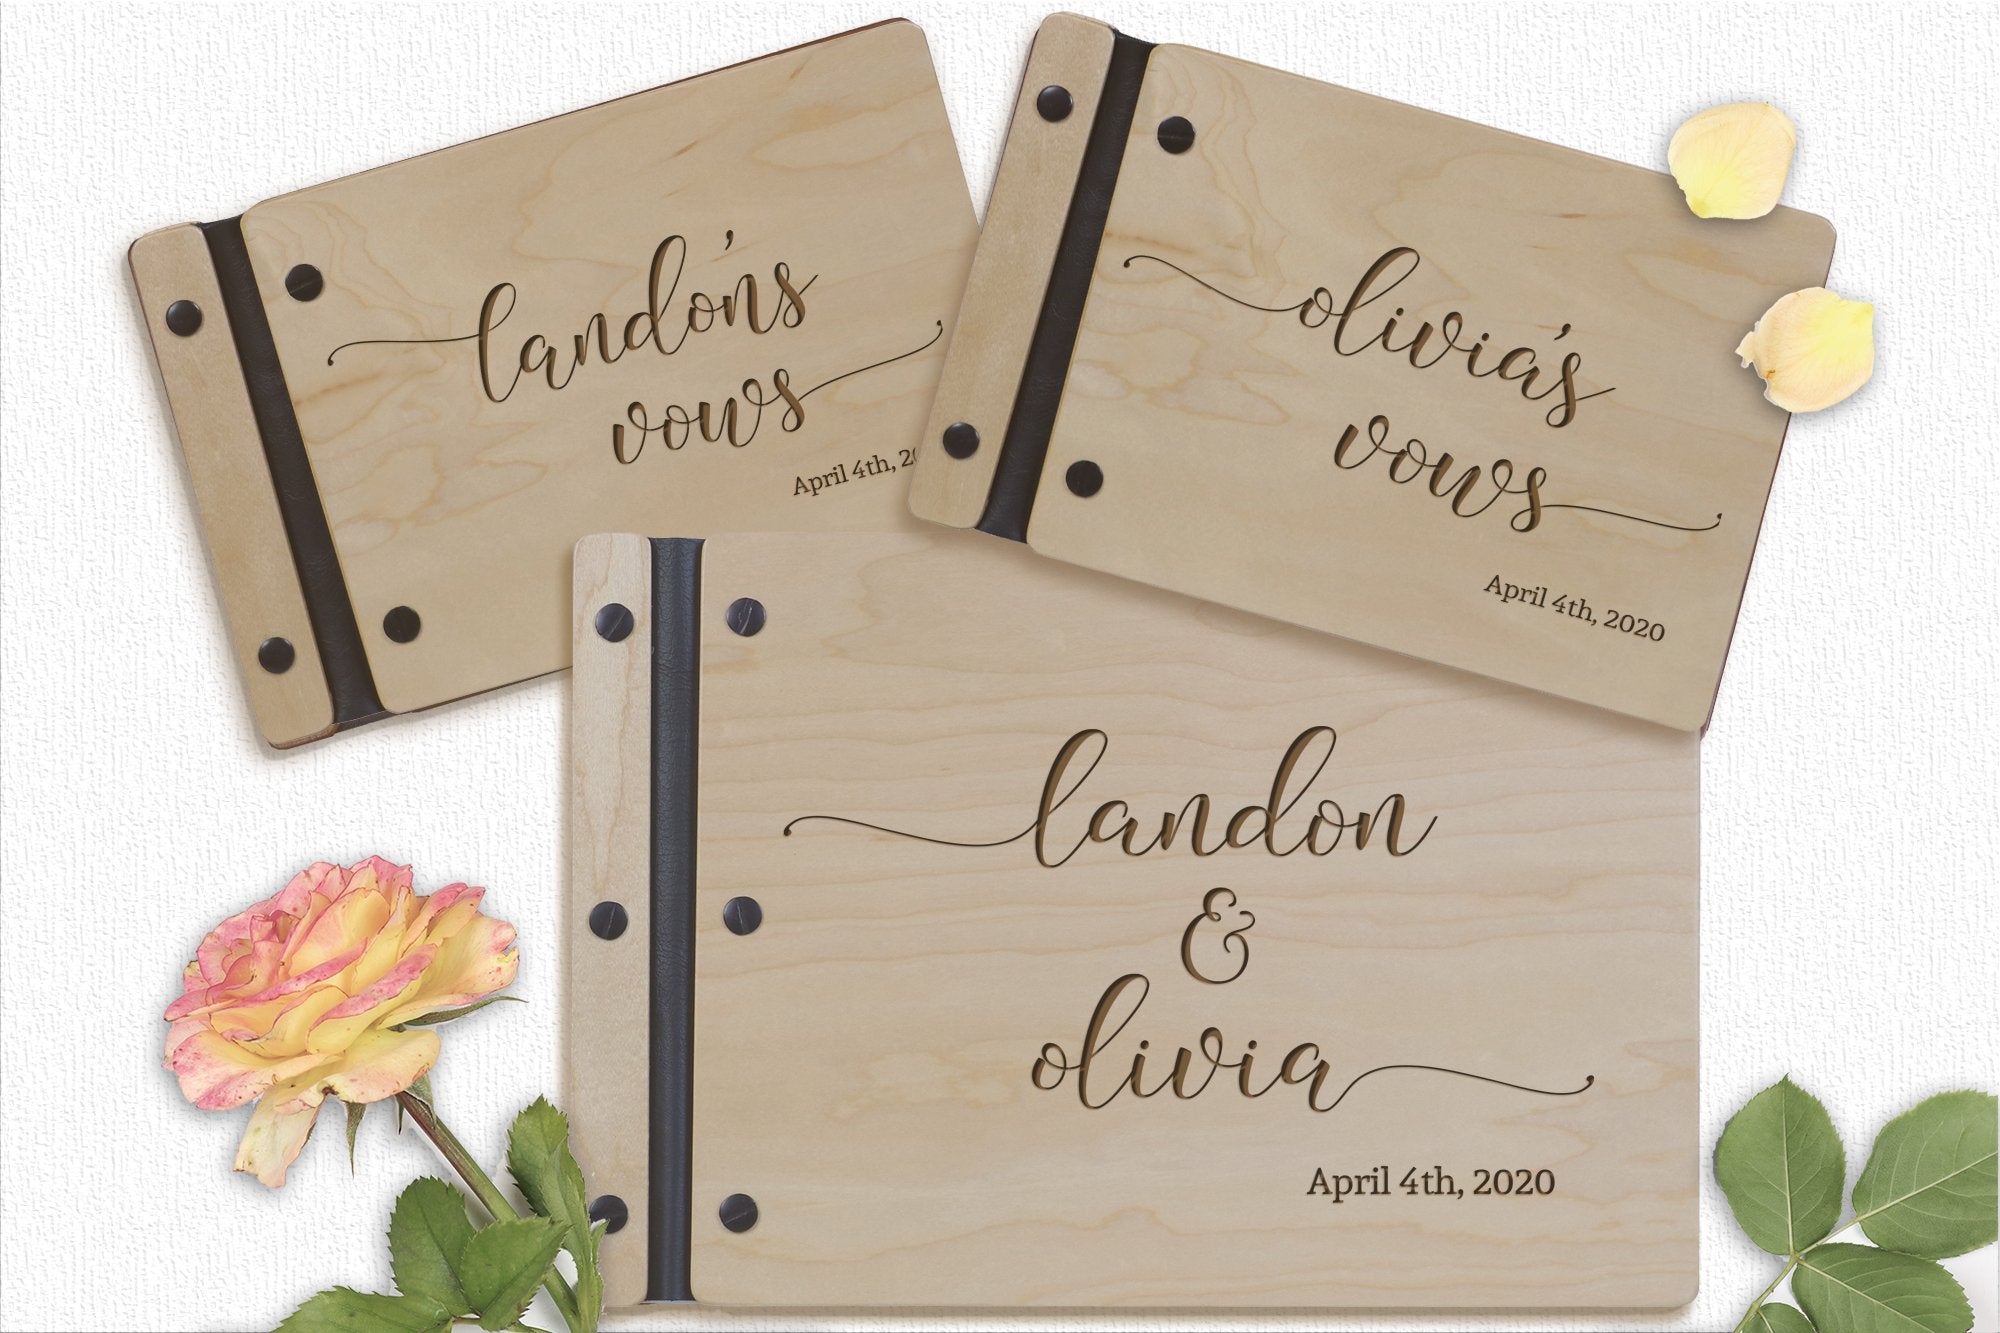 LifeSong Milestones Personalized Wedding Marriage Vow 3 Piece Guest Books - Husband and Wife Marriage Celebration, Custom Engraved Wooden Signature Registry Guest Book